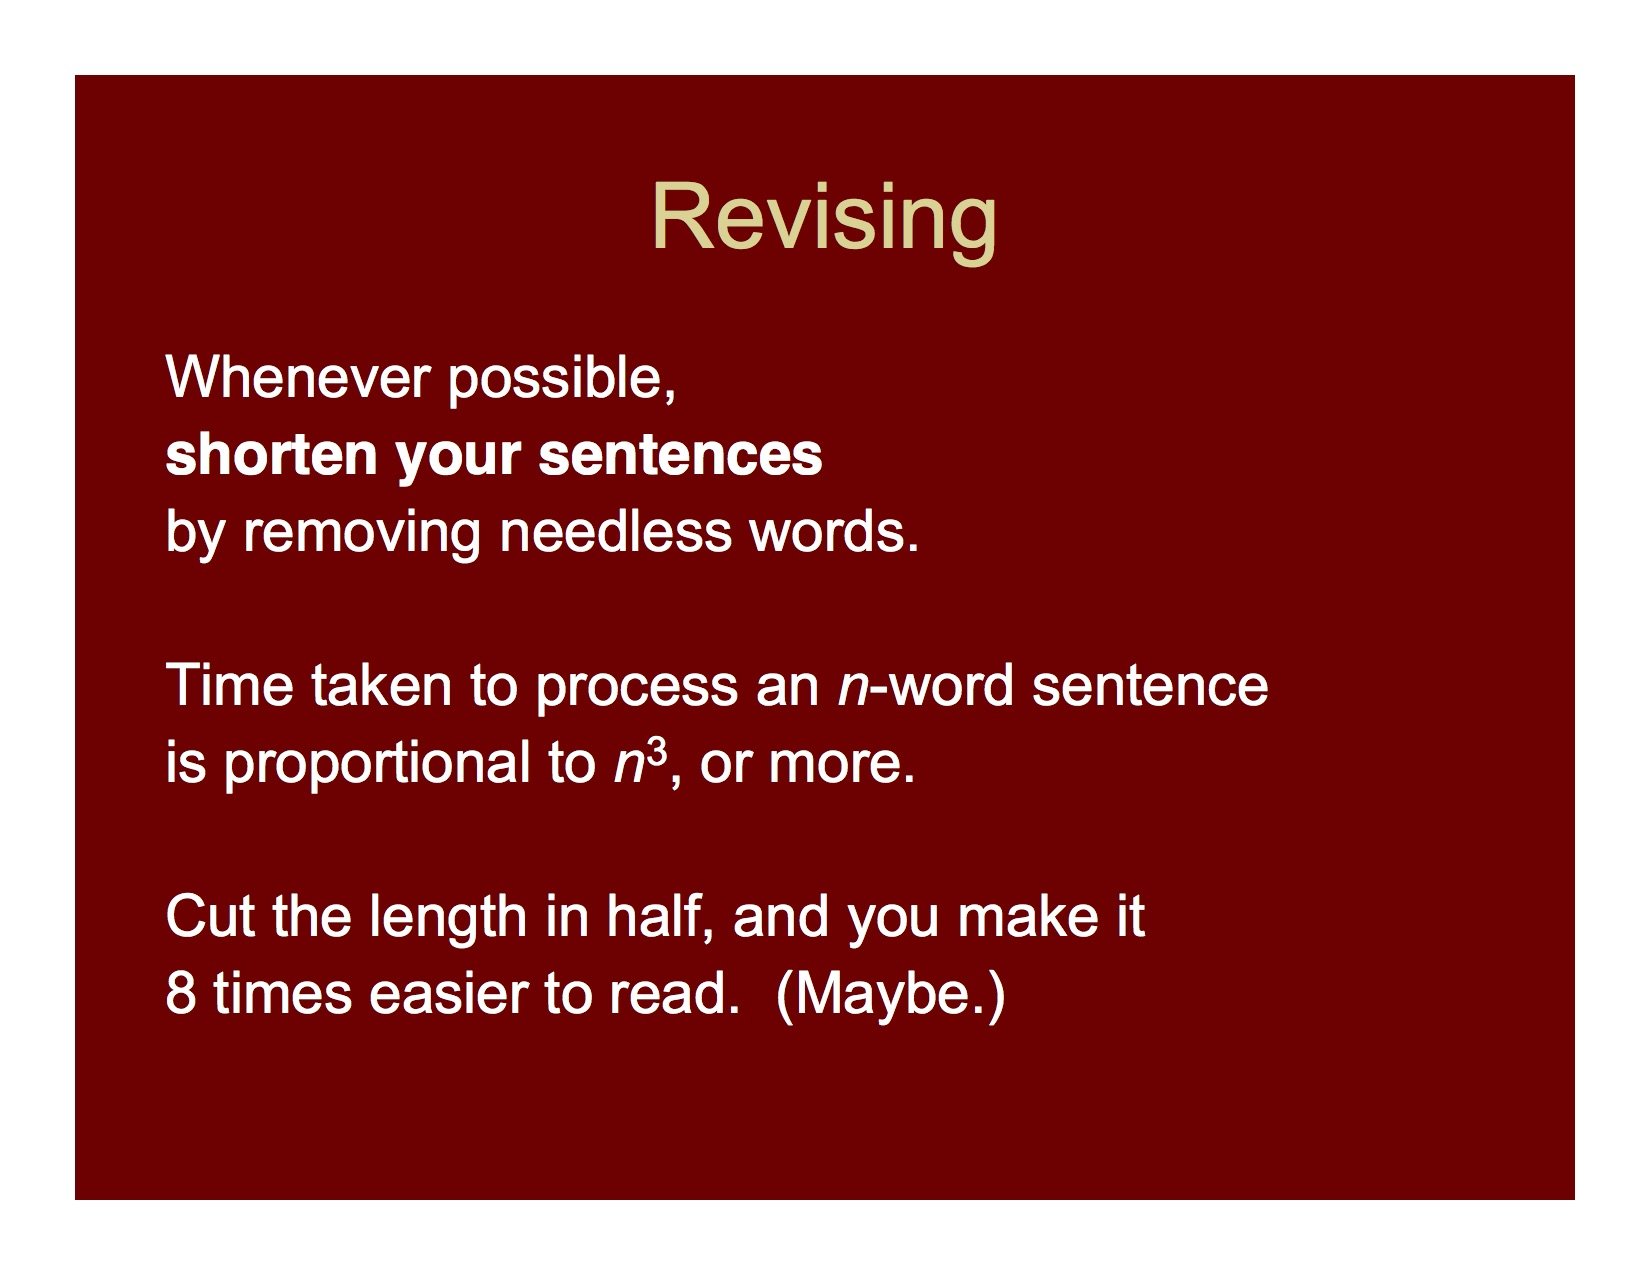 Whenever possible shorten your sentences by removing needless words.